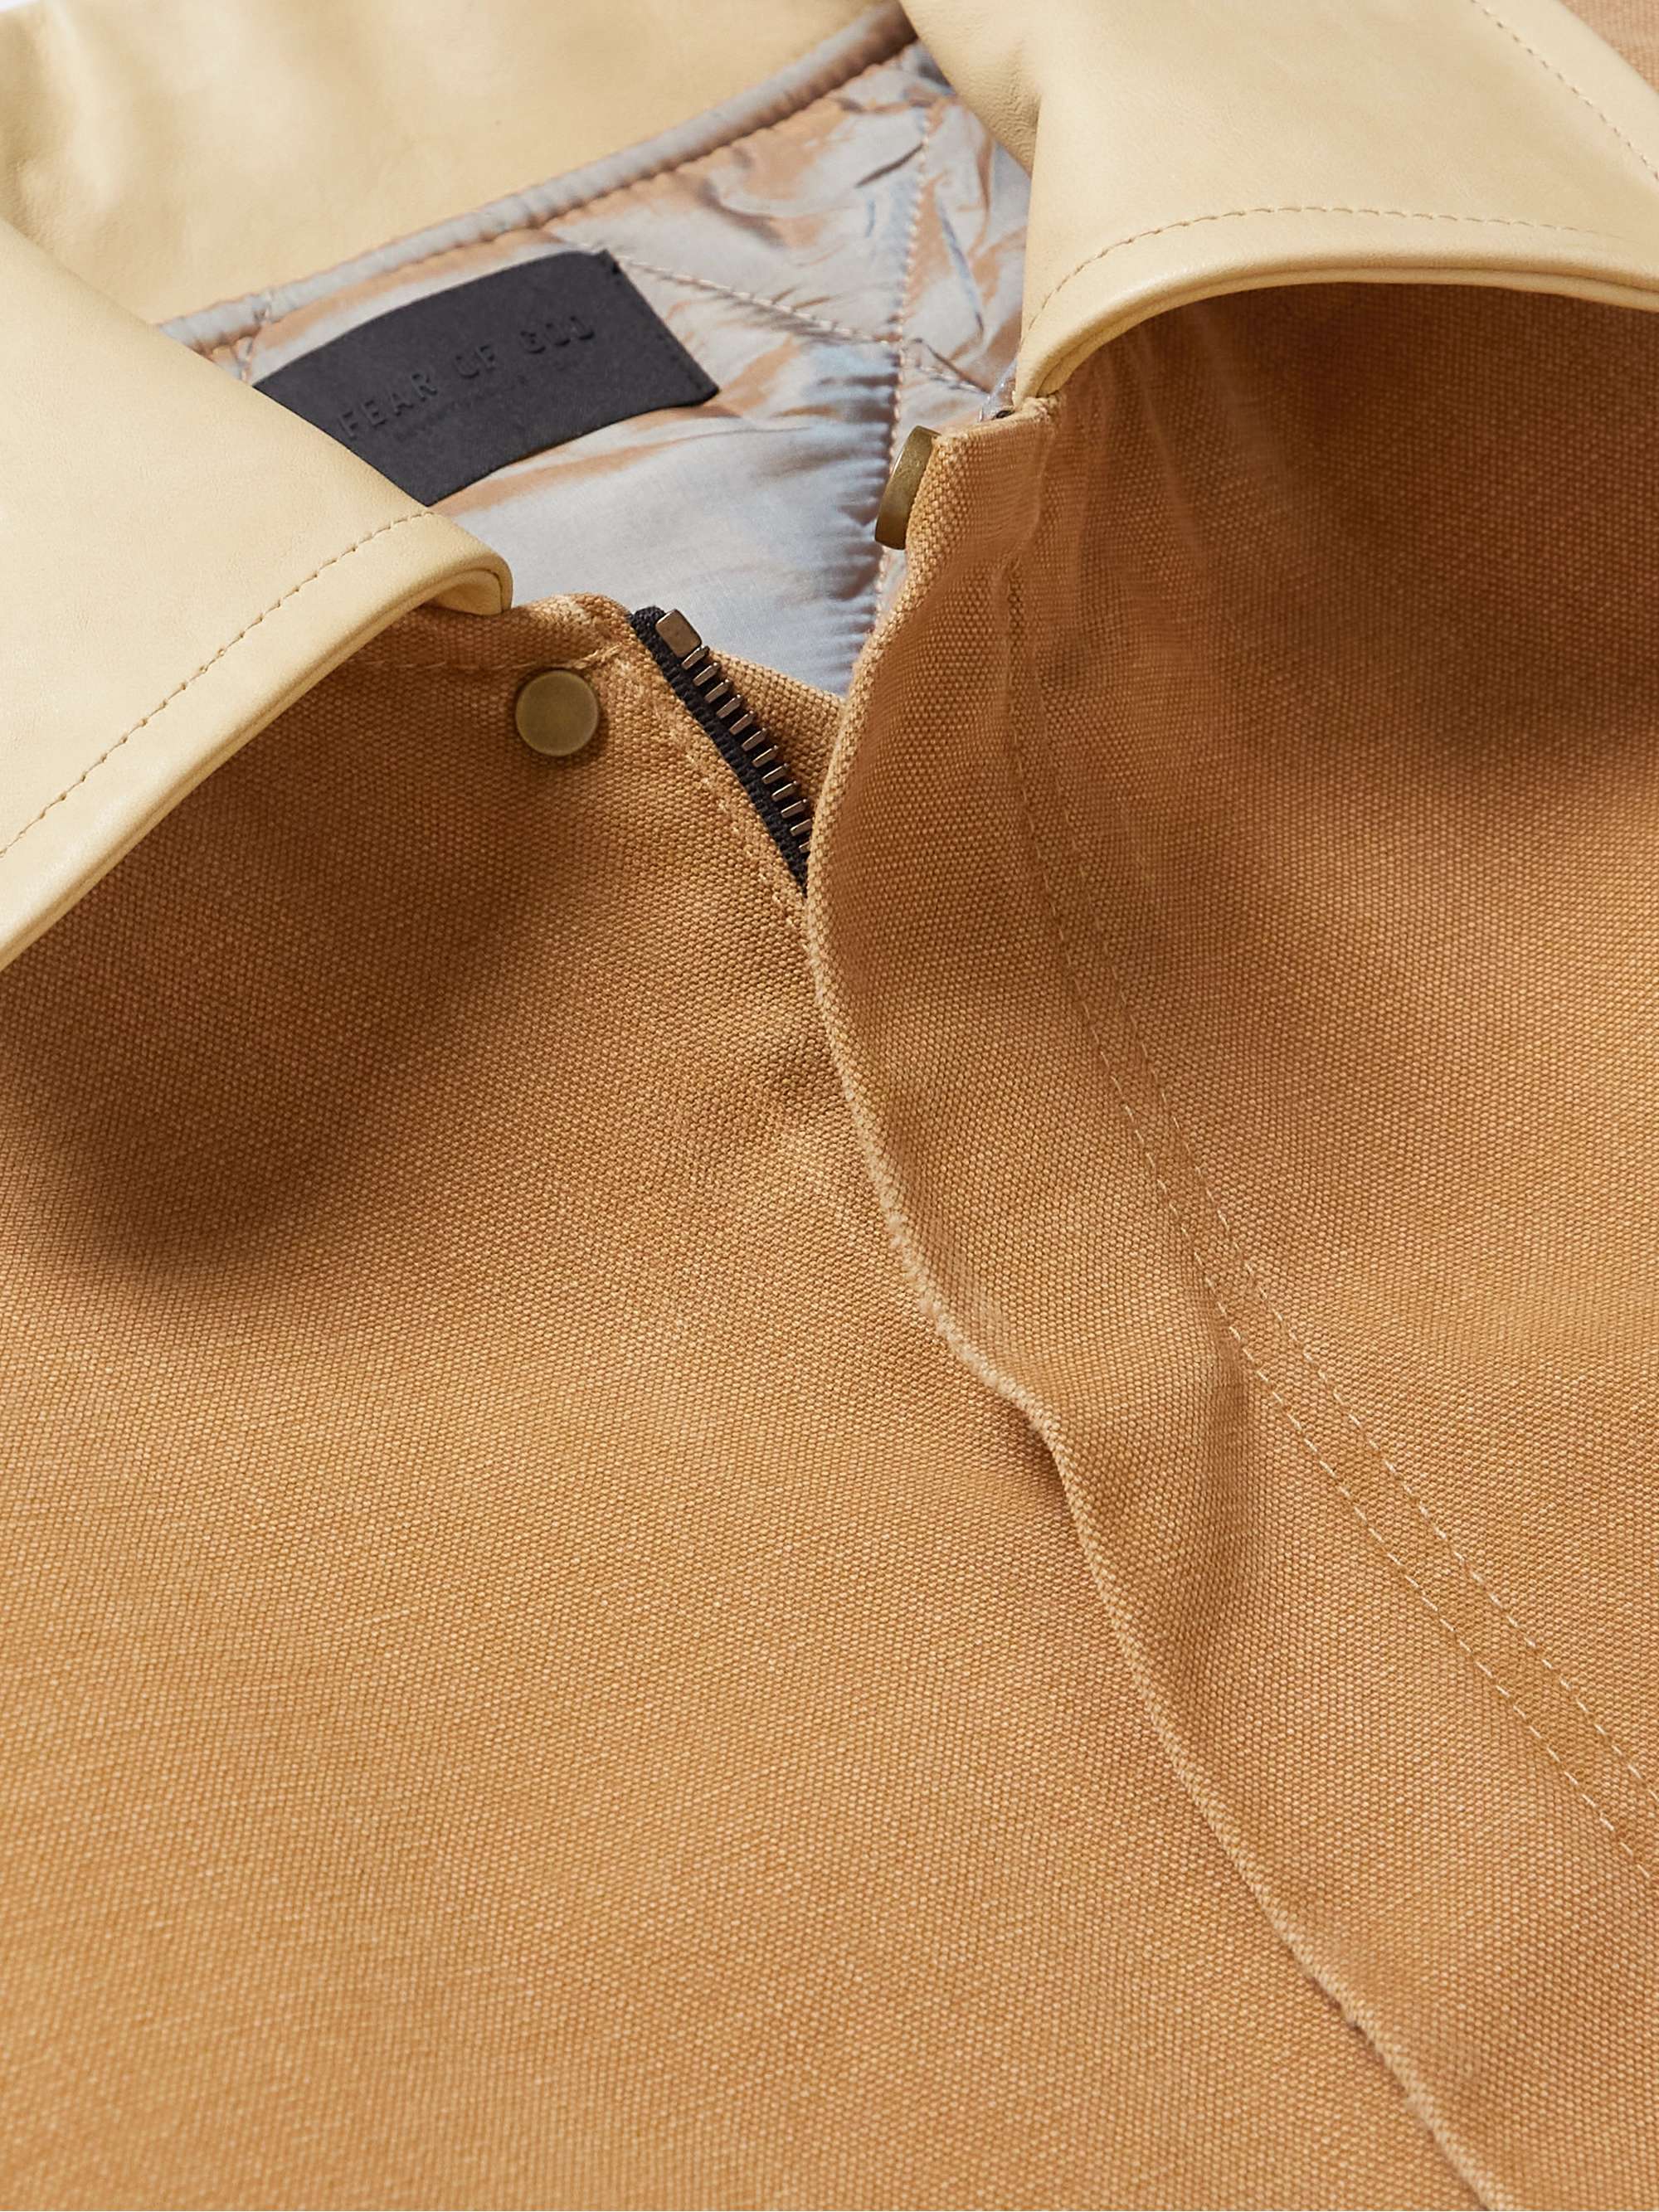 FEAR OF GOD Suede-Trimmed Stone-Washed Cotton-Canvas Jacket